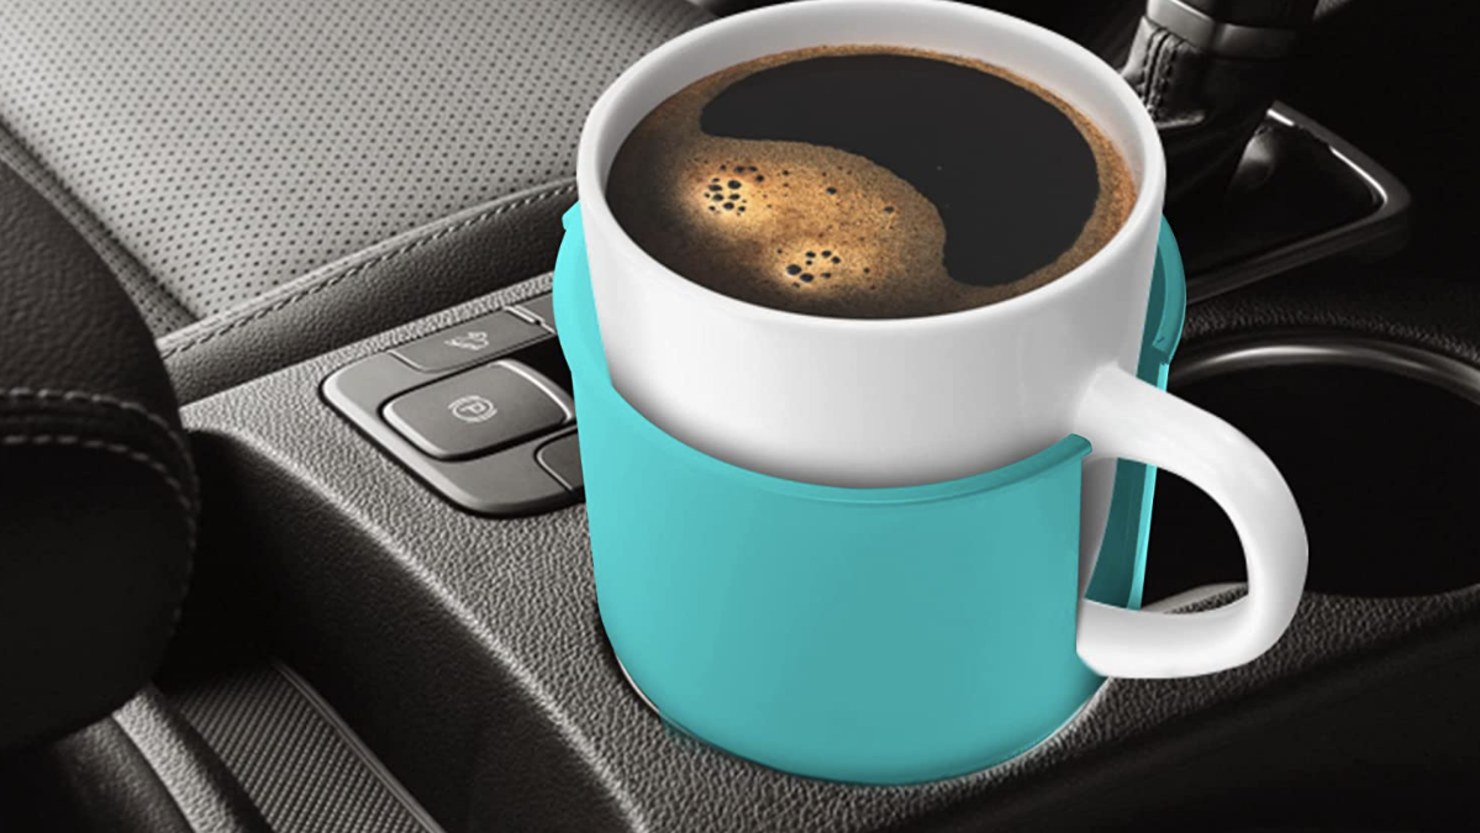 The Smart Kup Car Cup Holder is on sale for $14